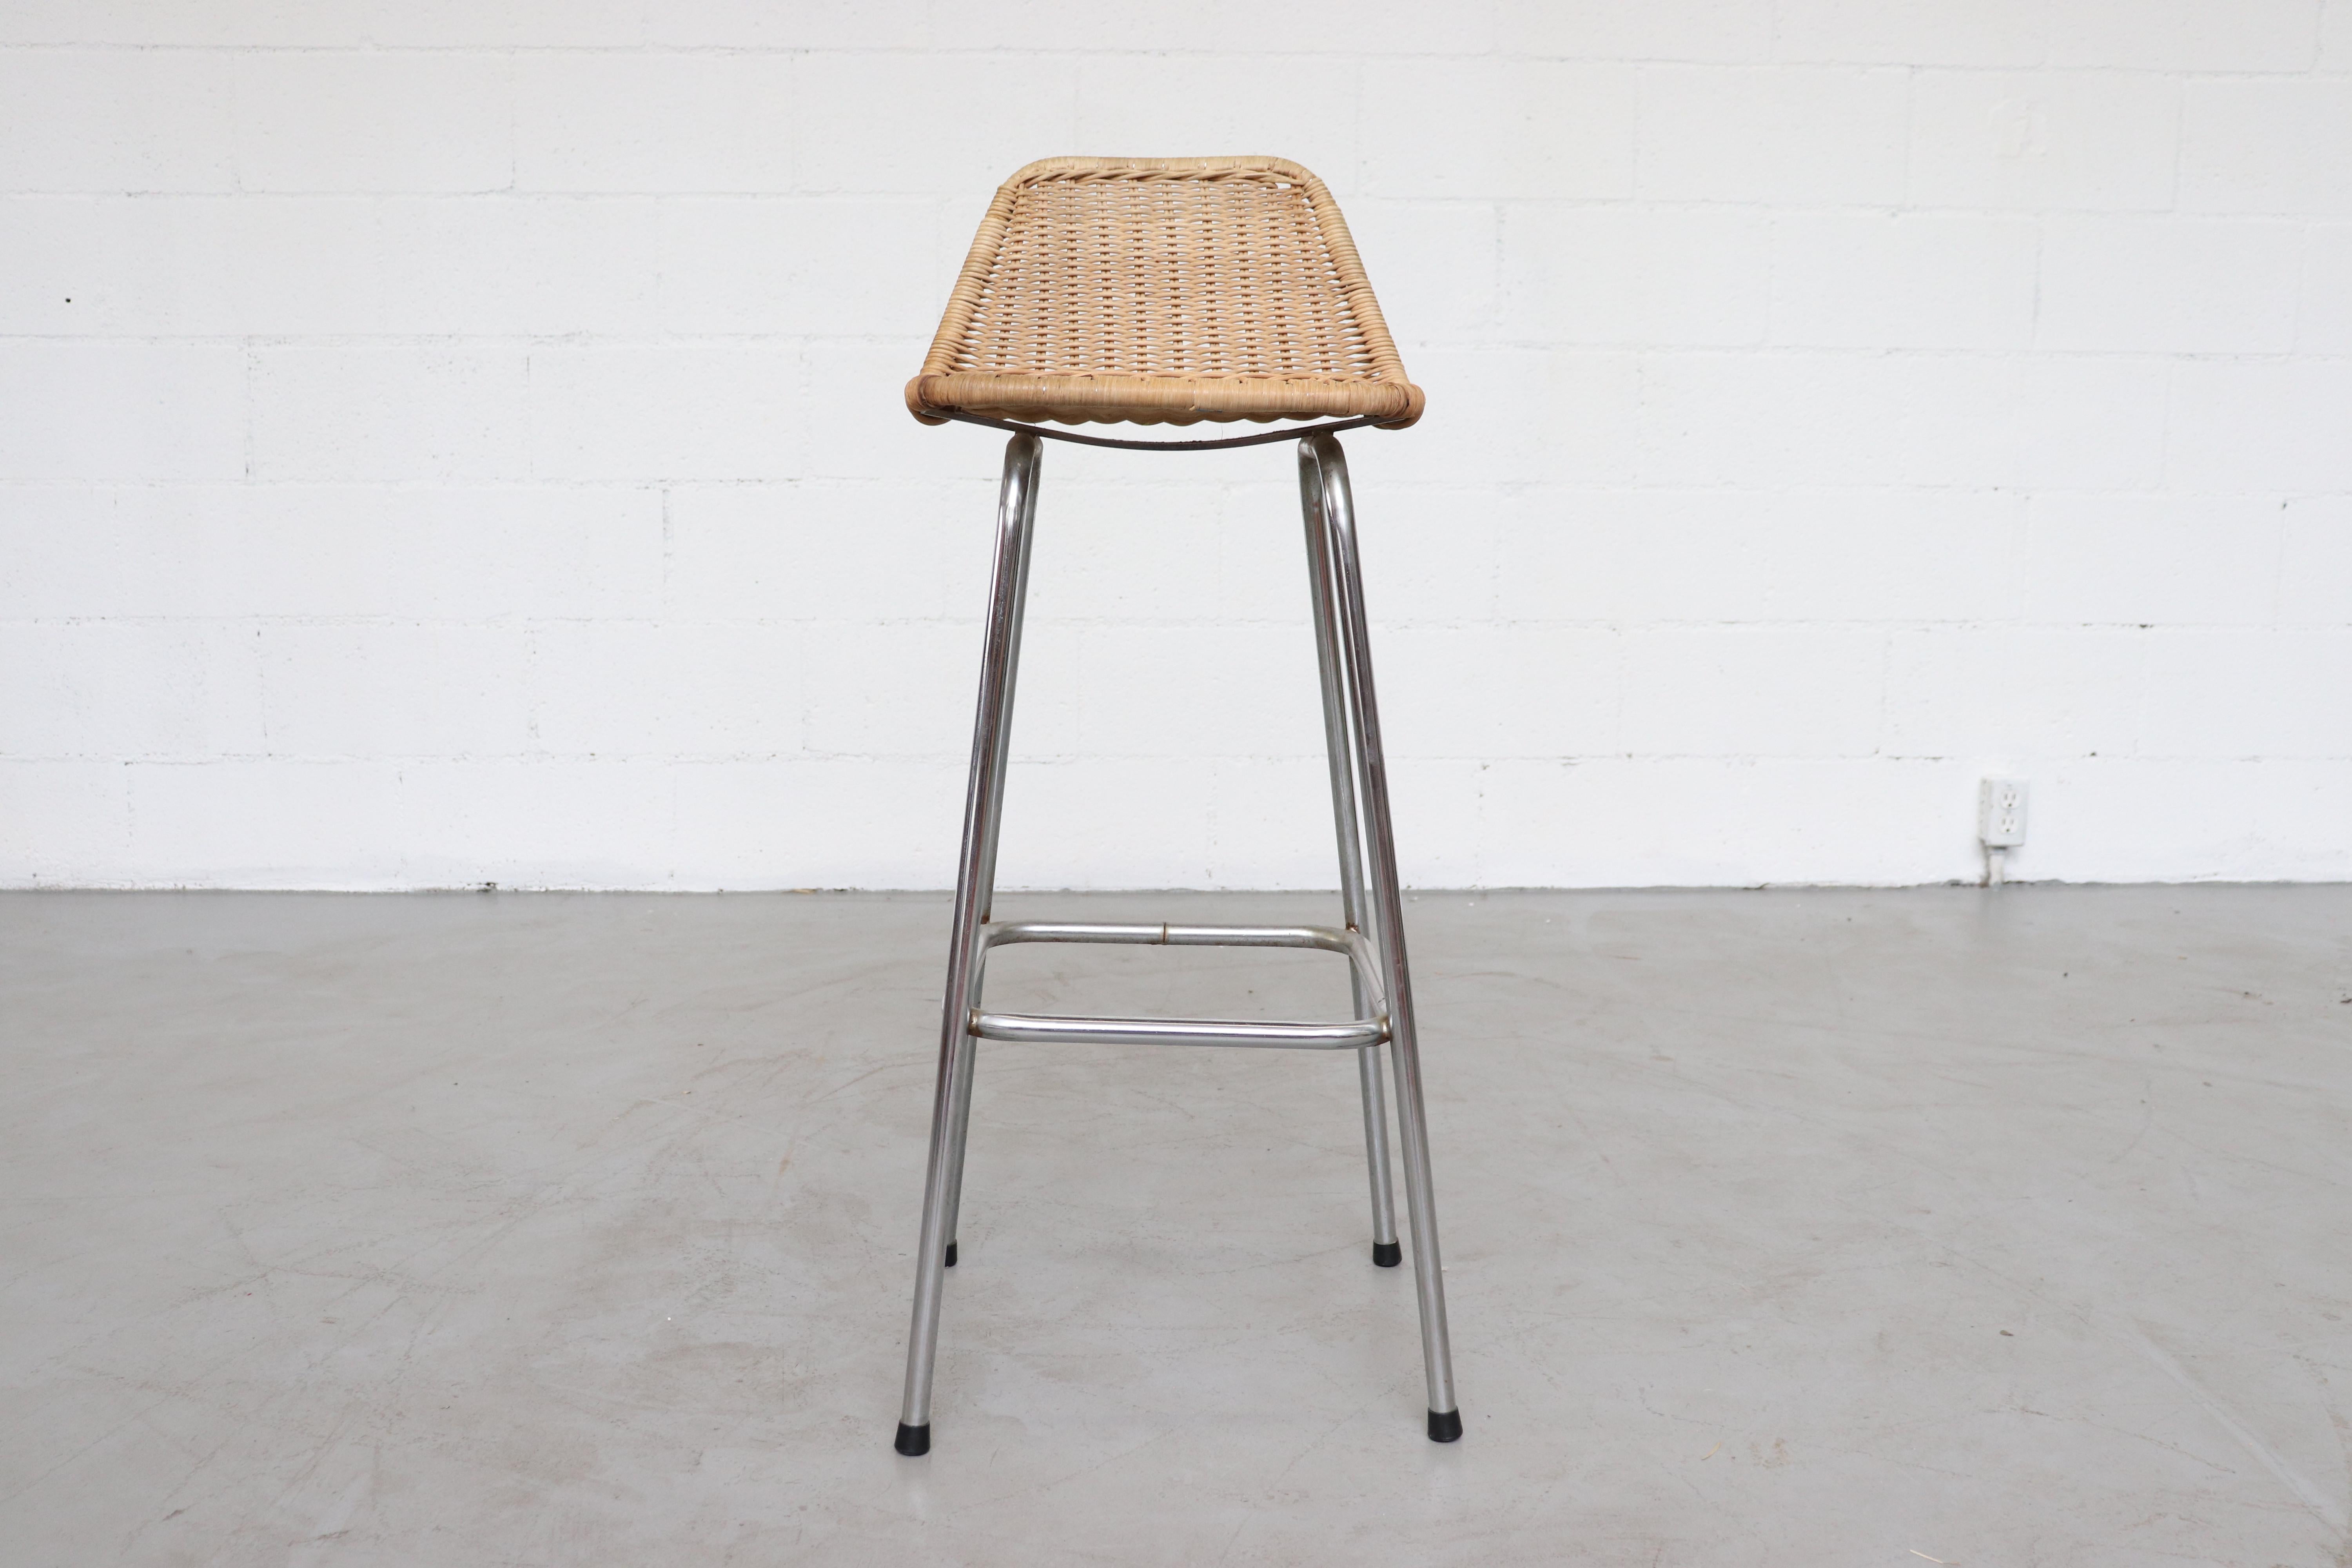 Charlotte Perriand inspired wicker and chrome metal bar stools with angled seat back. In original condition. Some may have weld discoloration marks in spots. All in original condition. Set price.